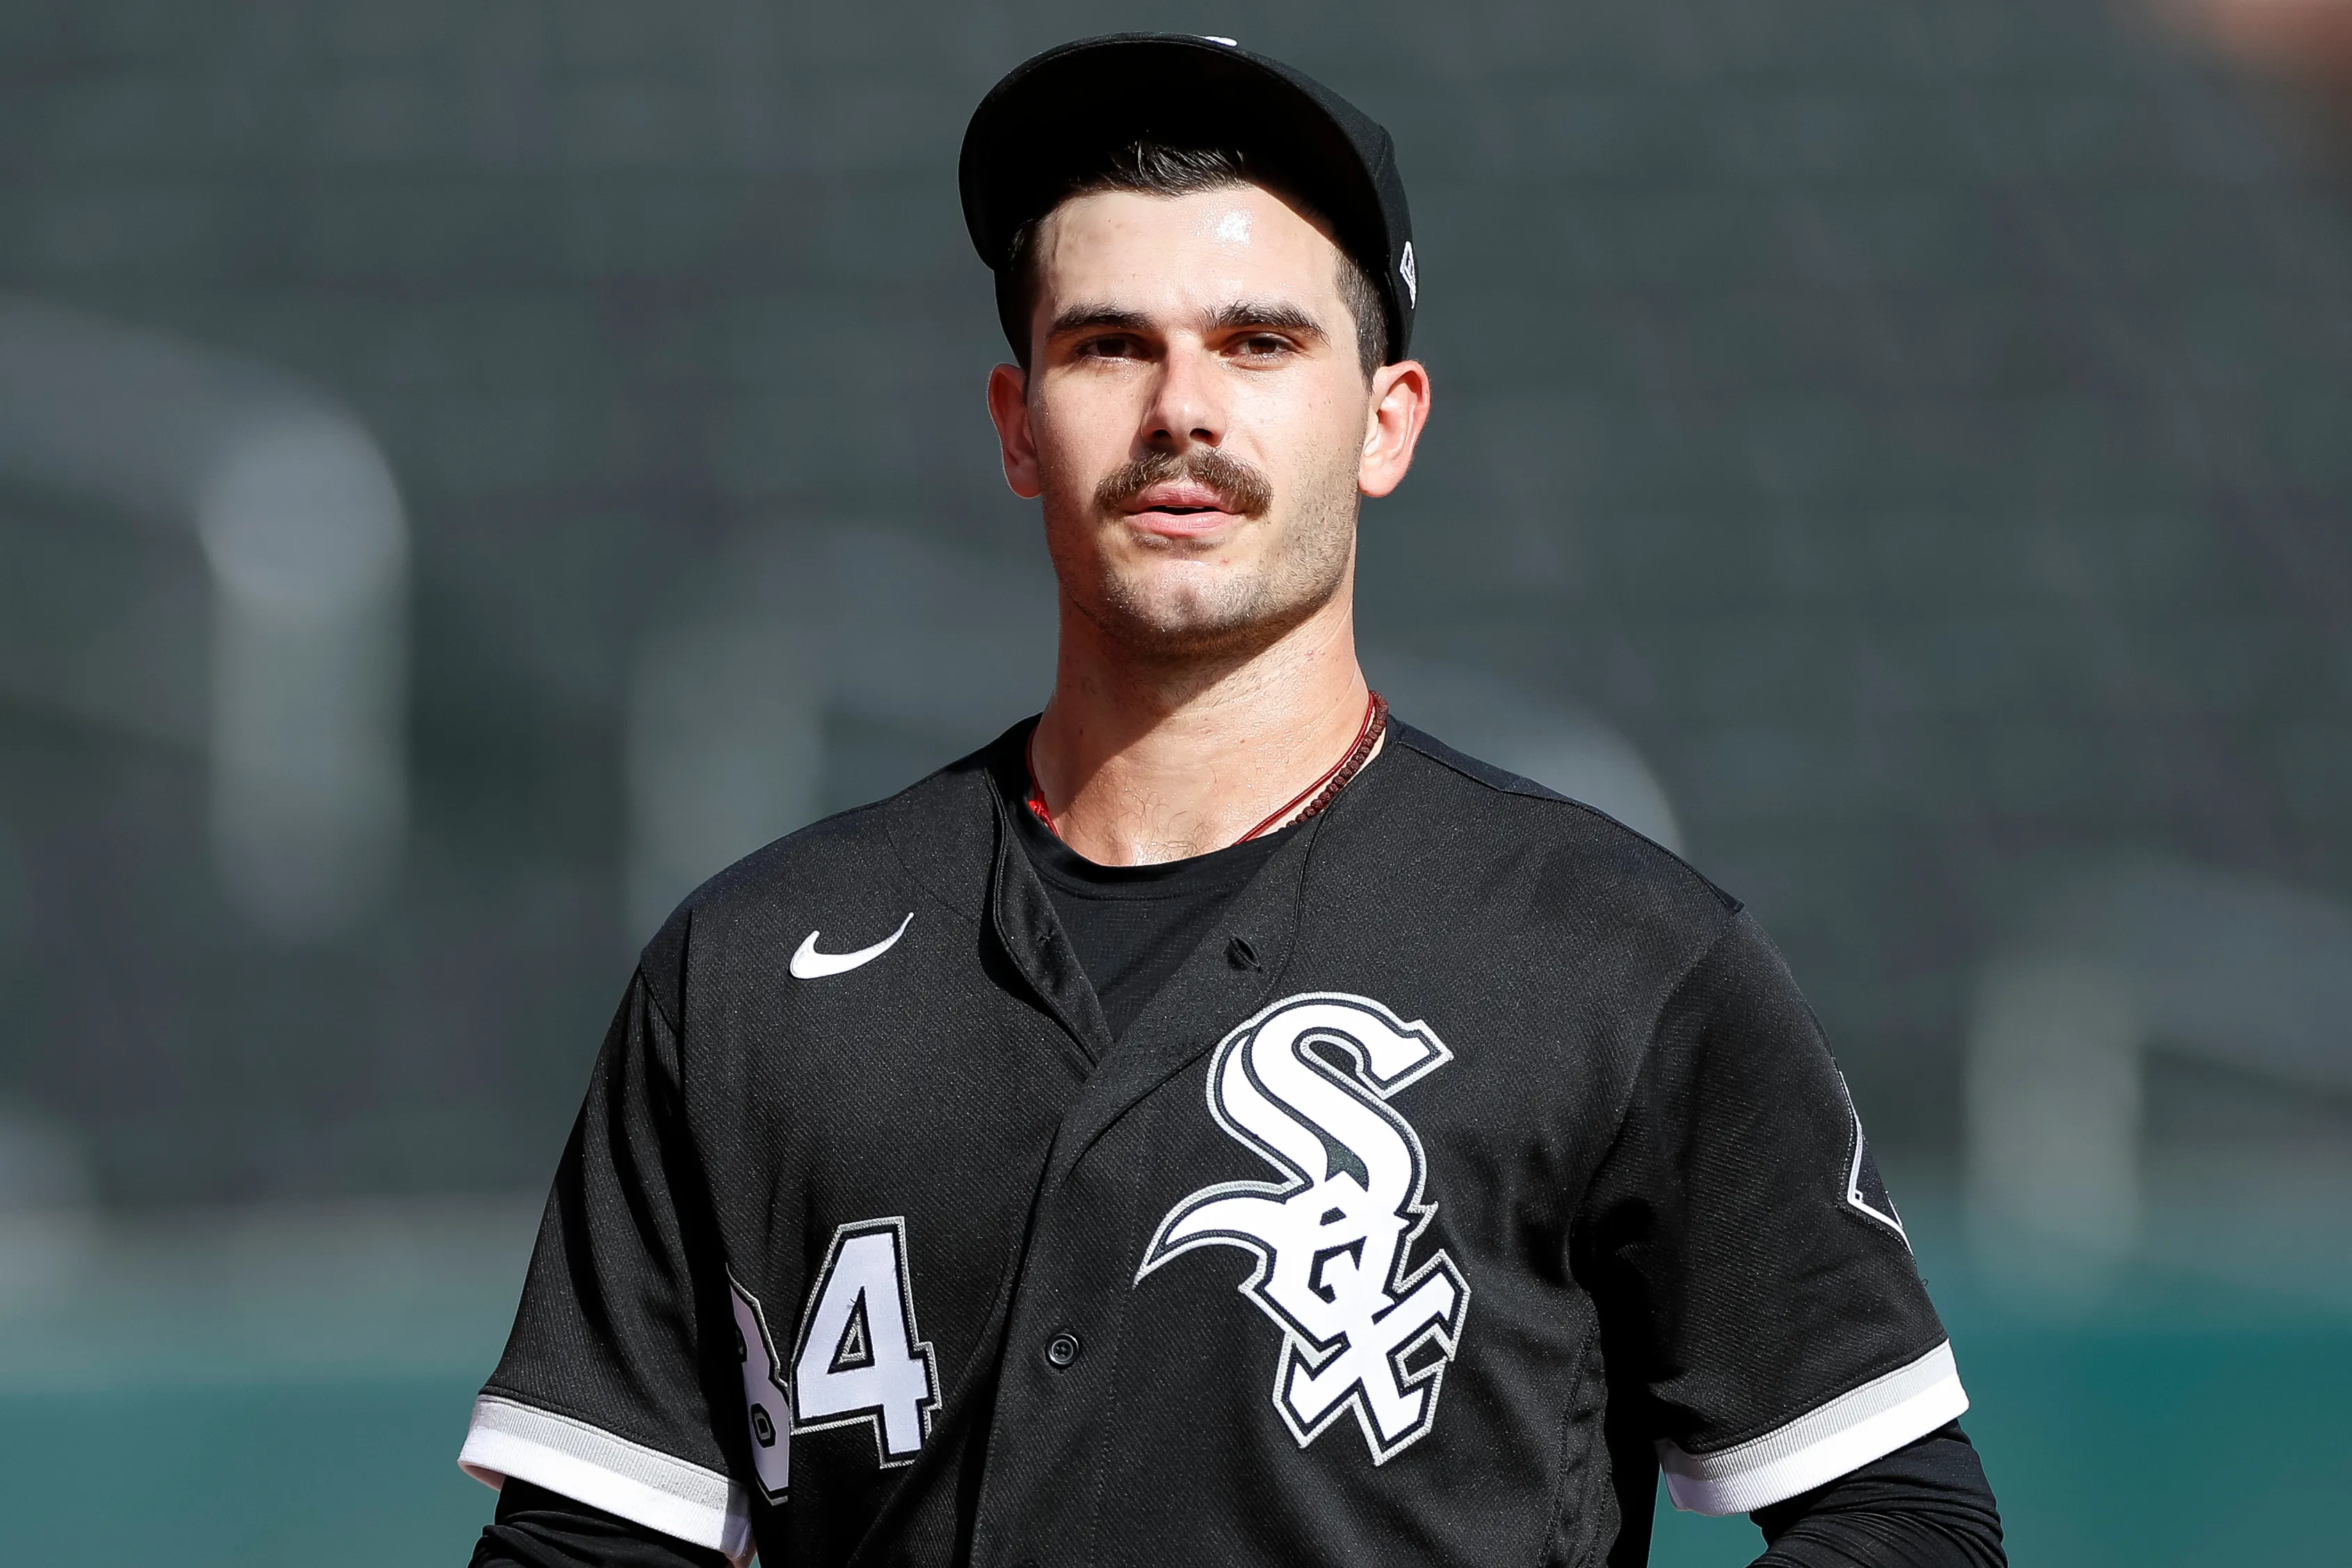 White Sox dodging Dylan Cease trade calls ahead of deadline